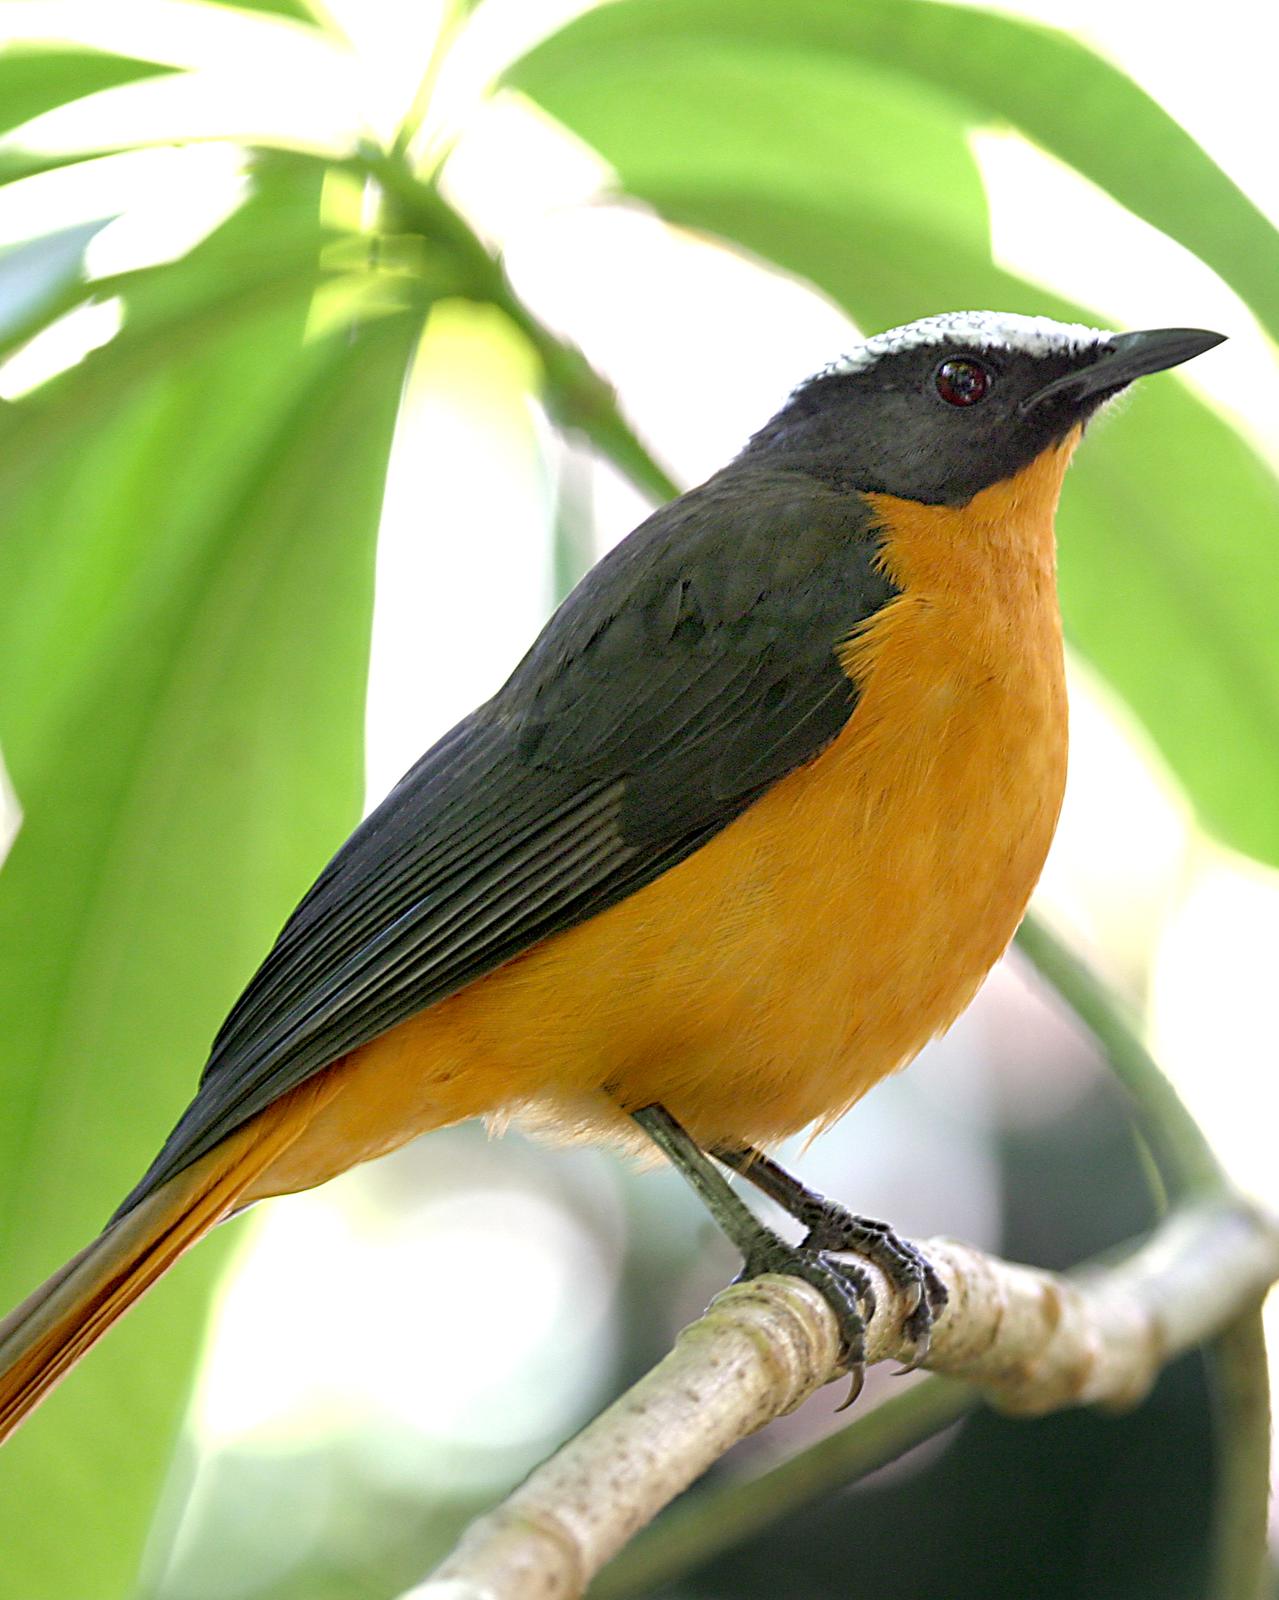 White-crowned Robin-Chat Photo by Matthew P. Alexander